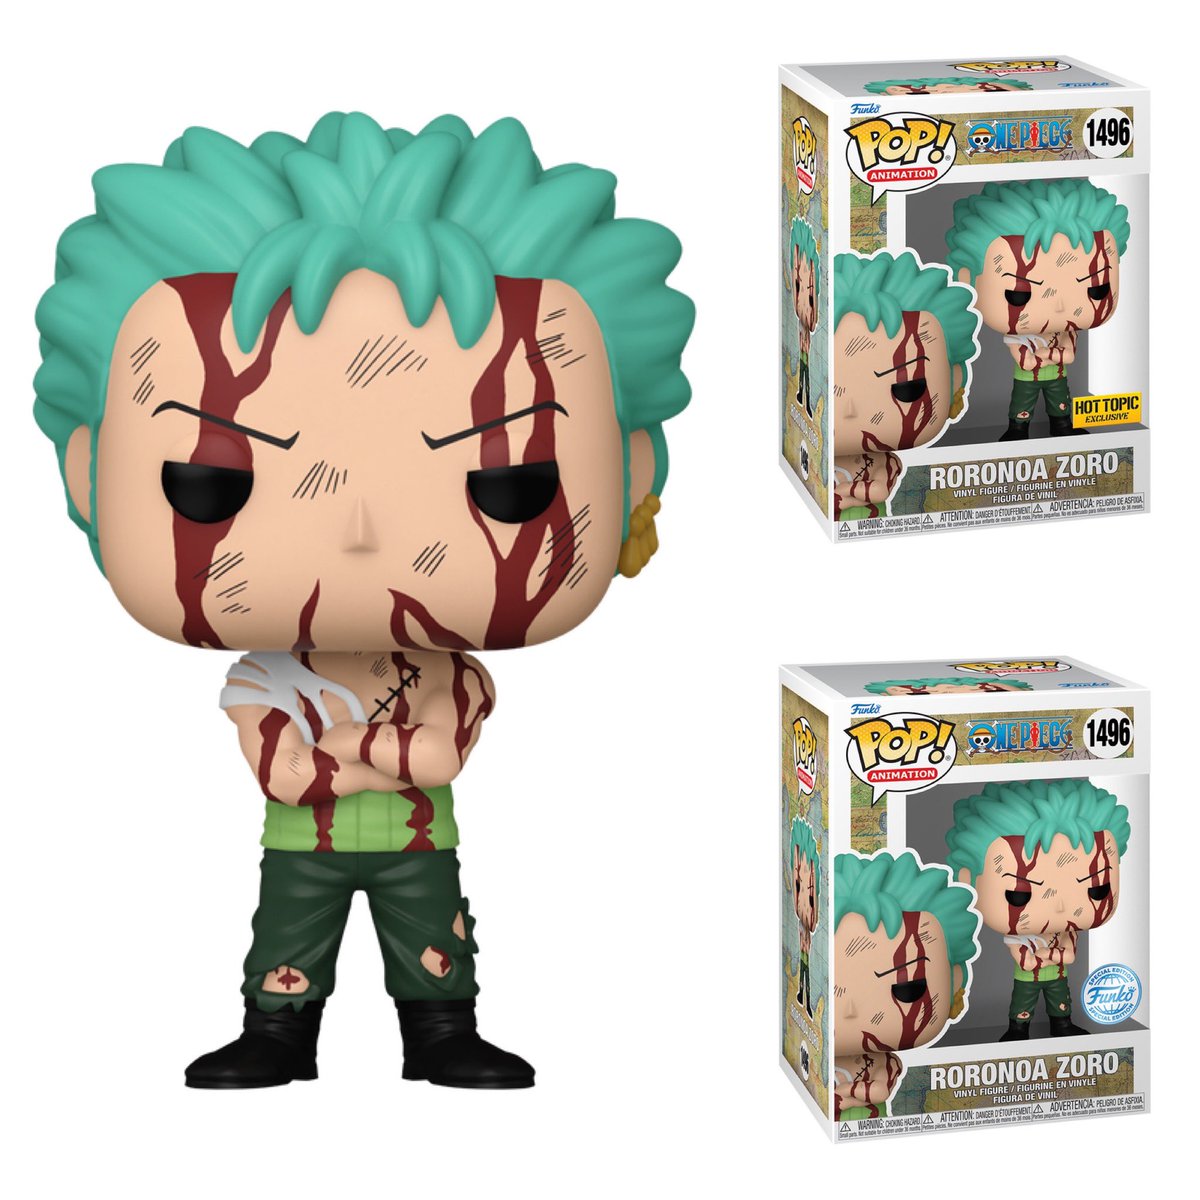 Restock - Hot Topic exclusive Zoro Nothing Happened is back up at Funko!
#Ad #OnePiece
.
distracker.info/3Ws4Mu6
.
#Funko #FunkoPop #FunkoPopVinyl #Pop #PopVinyl #Collectibles #Collectible #FunkoCollector #FunkoPops #Collector #Toy #Toys #DisTrackers